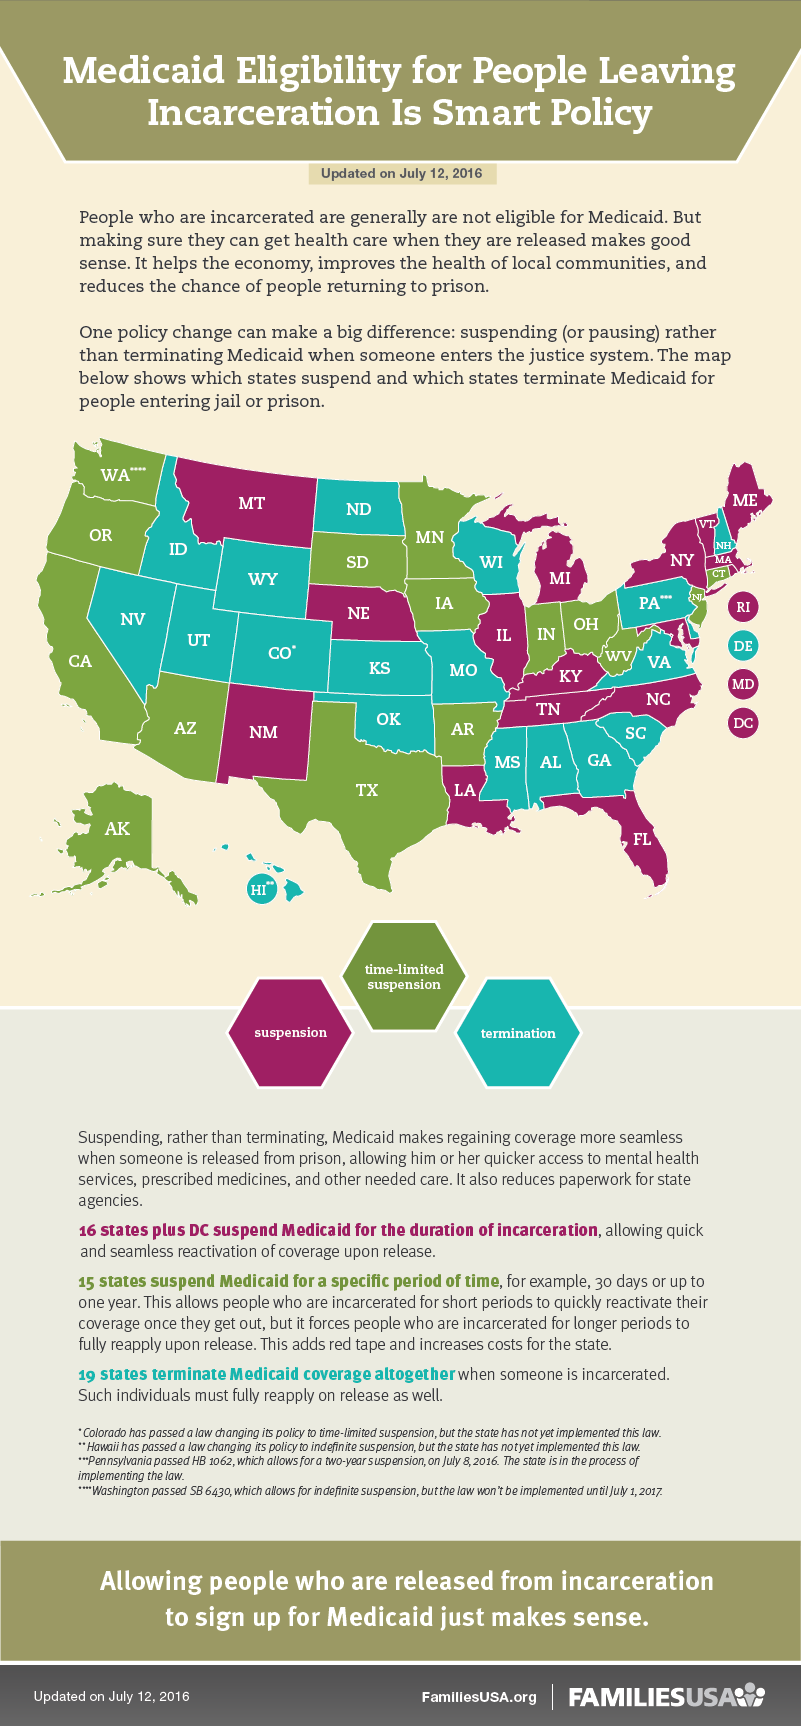 https://familiesusa.org/wp-content/uploads/2019/09/ENR_Suspension-v.-Termination-Map-Infographic_07-12-16_infographic.png